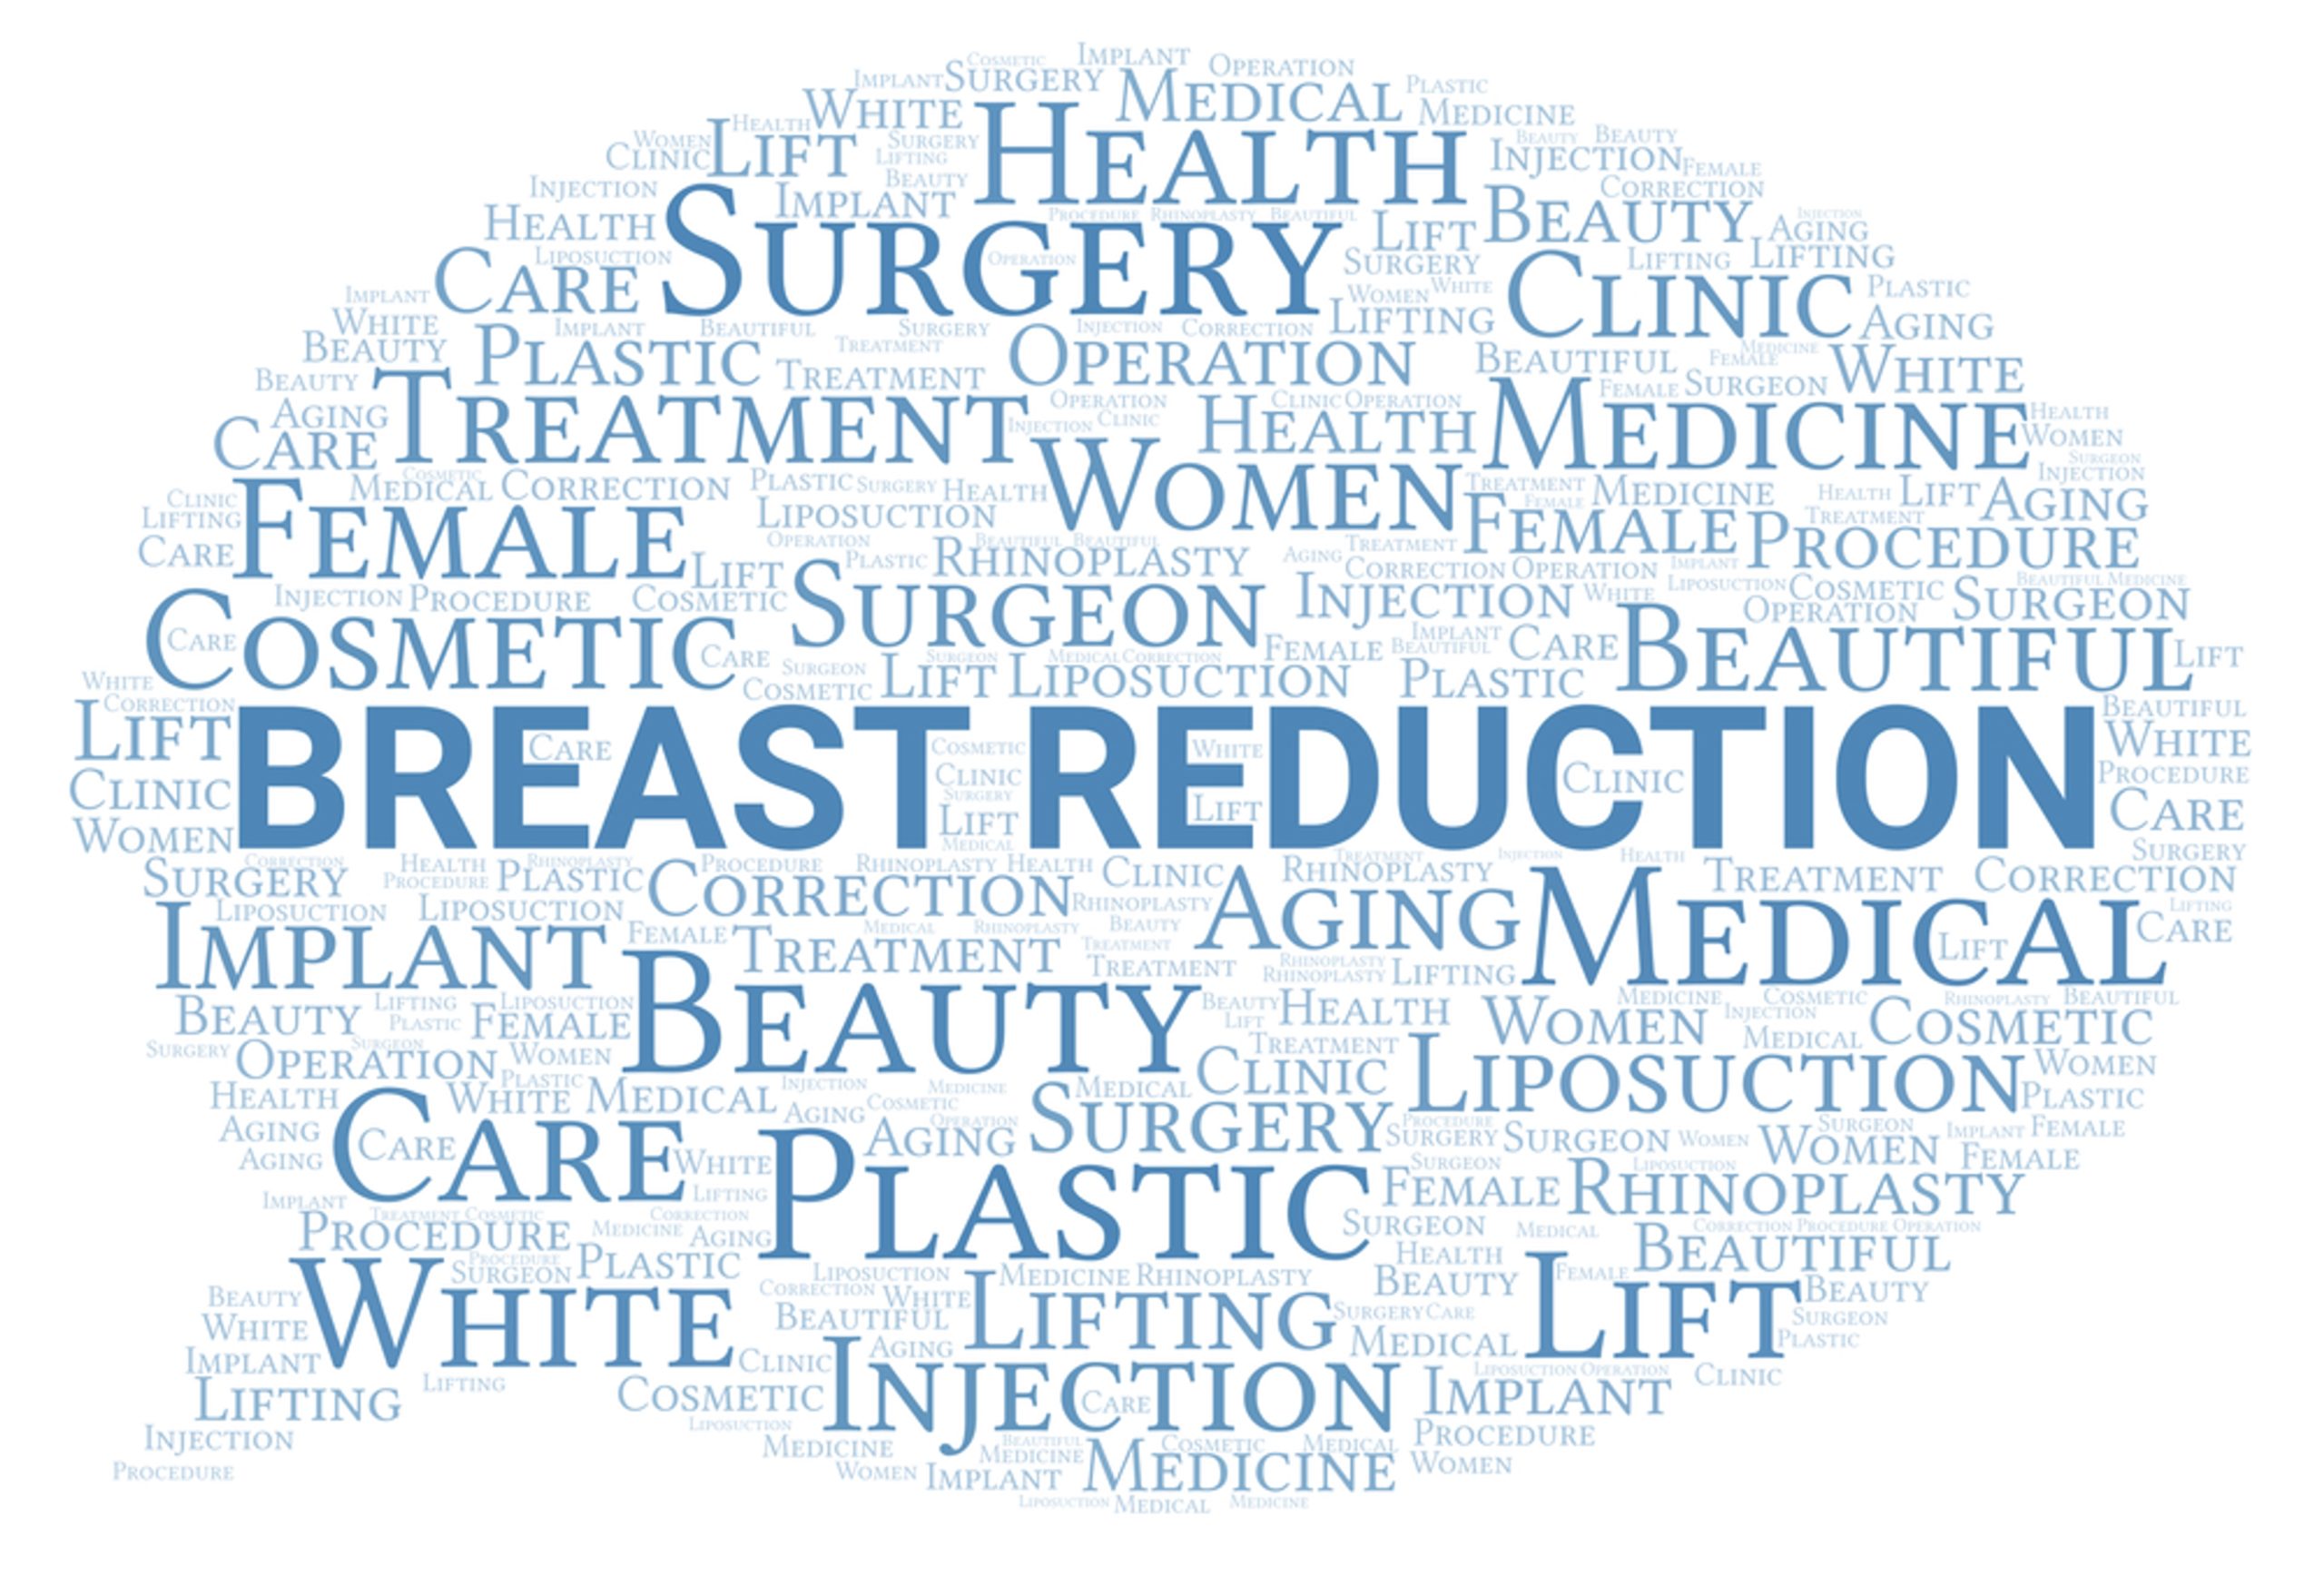 breast-reduction-surgery-scaled.jpg